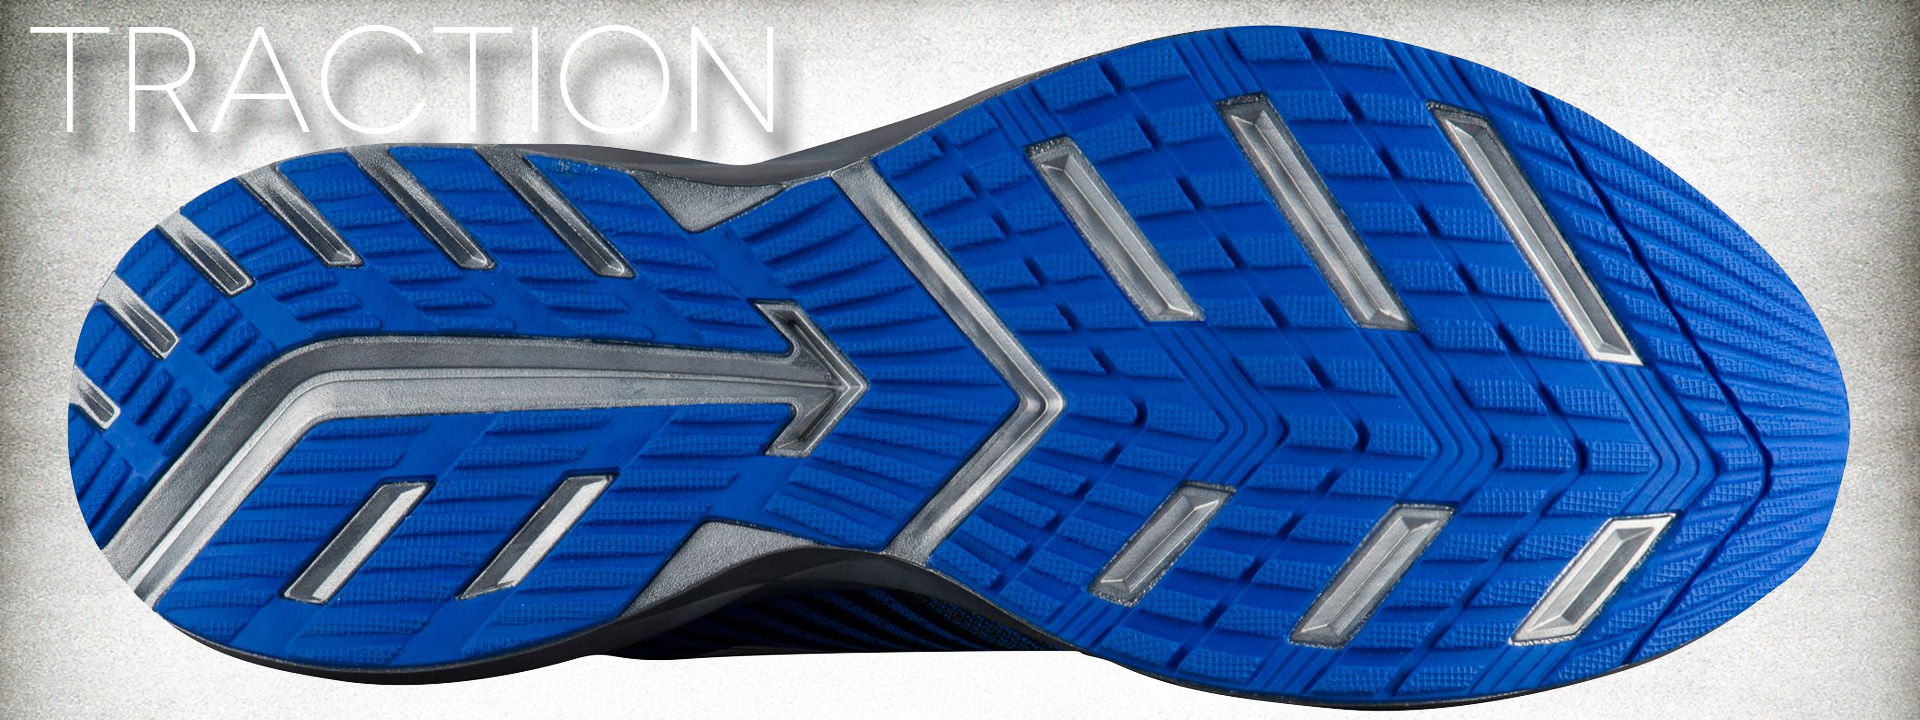 Brooks Levitate Performance Review traction sandy dover